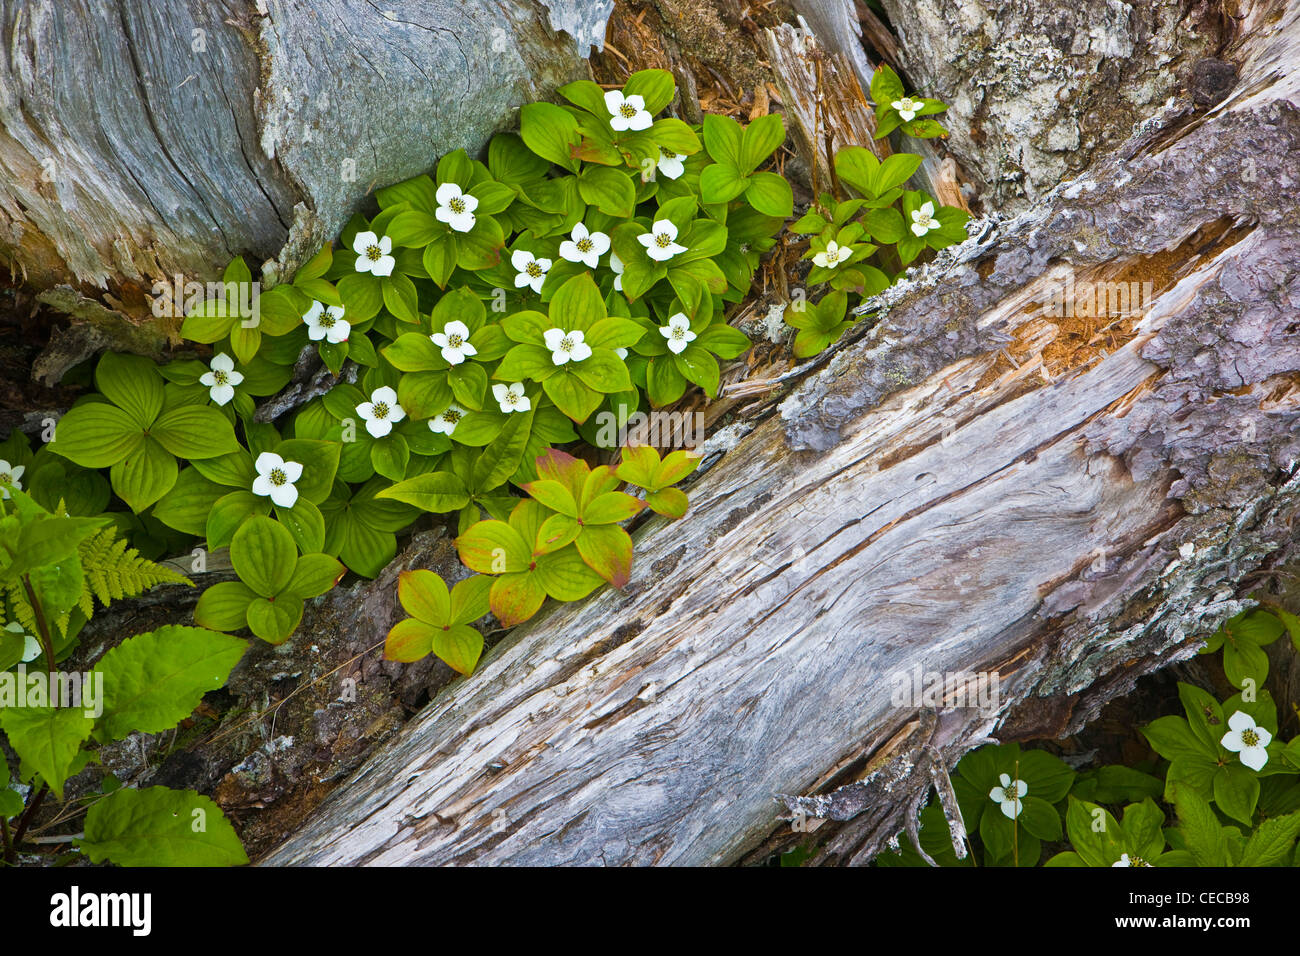 Bunchberries bloom in a spruce forest at Quoddy Head State Park in Lubec, Maine.  Easternmost point in the United States. Stock Photo